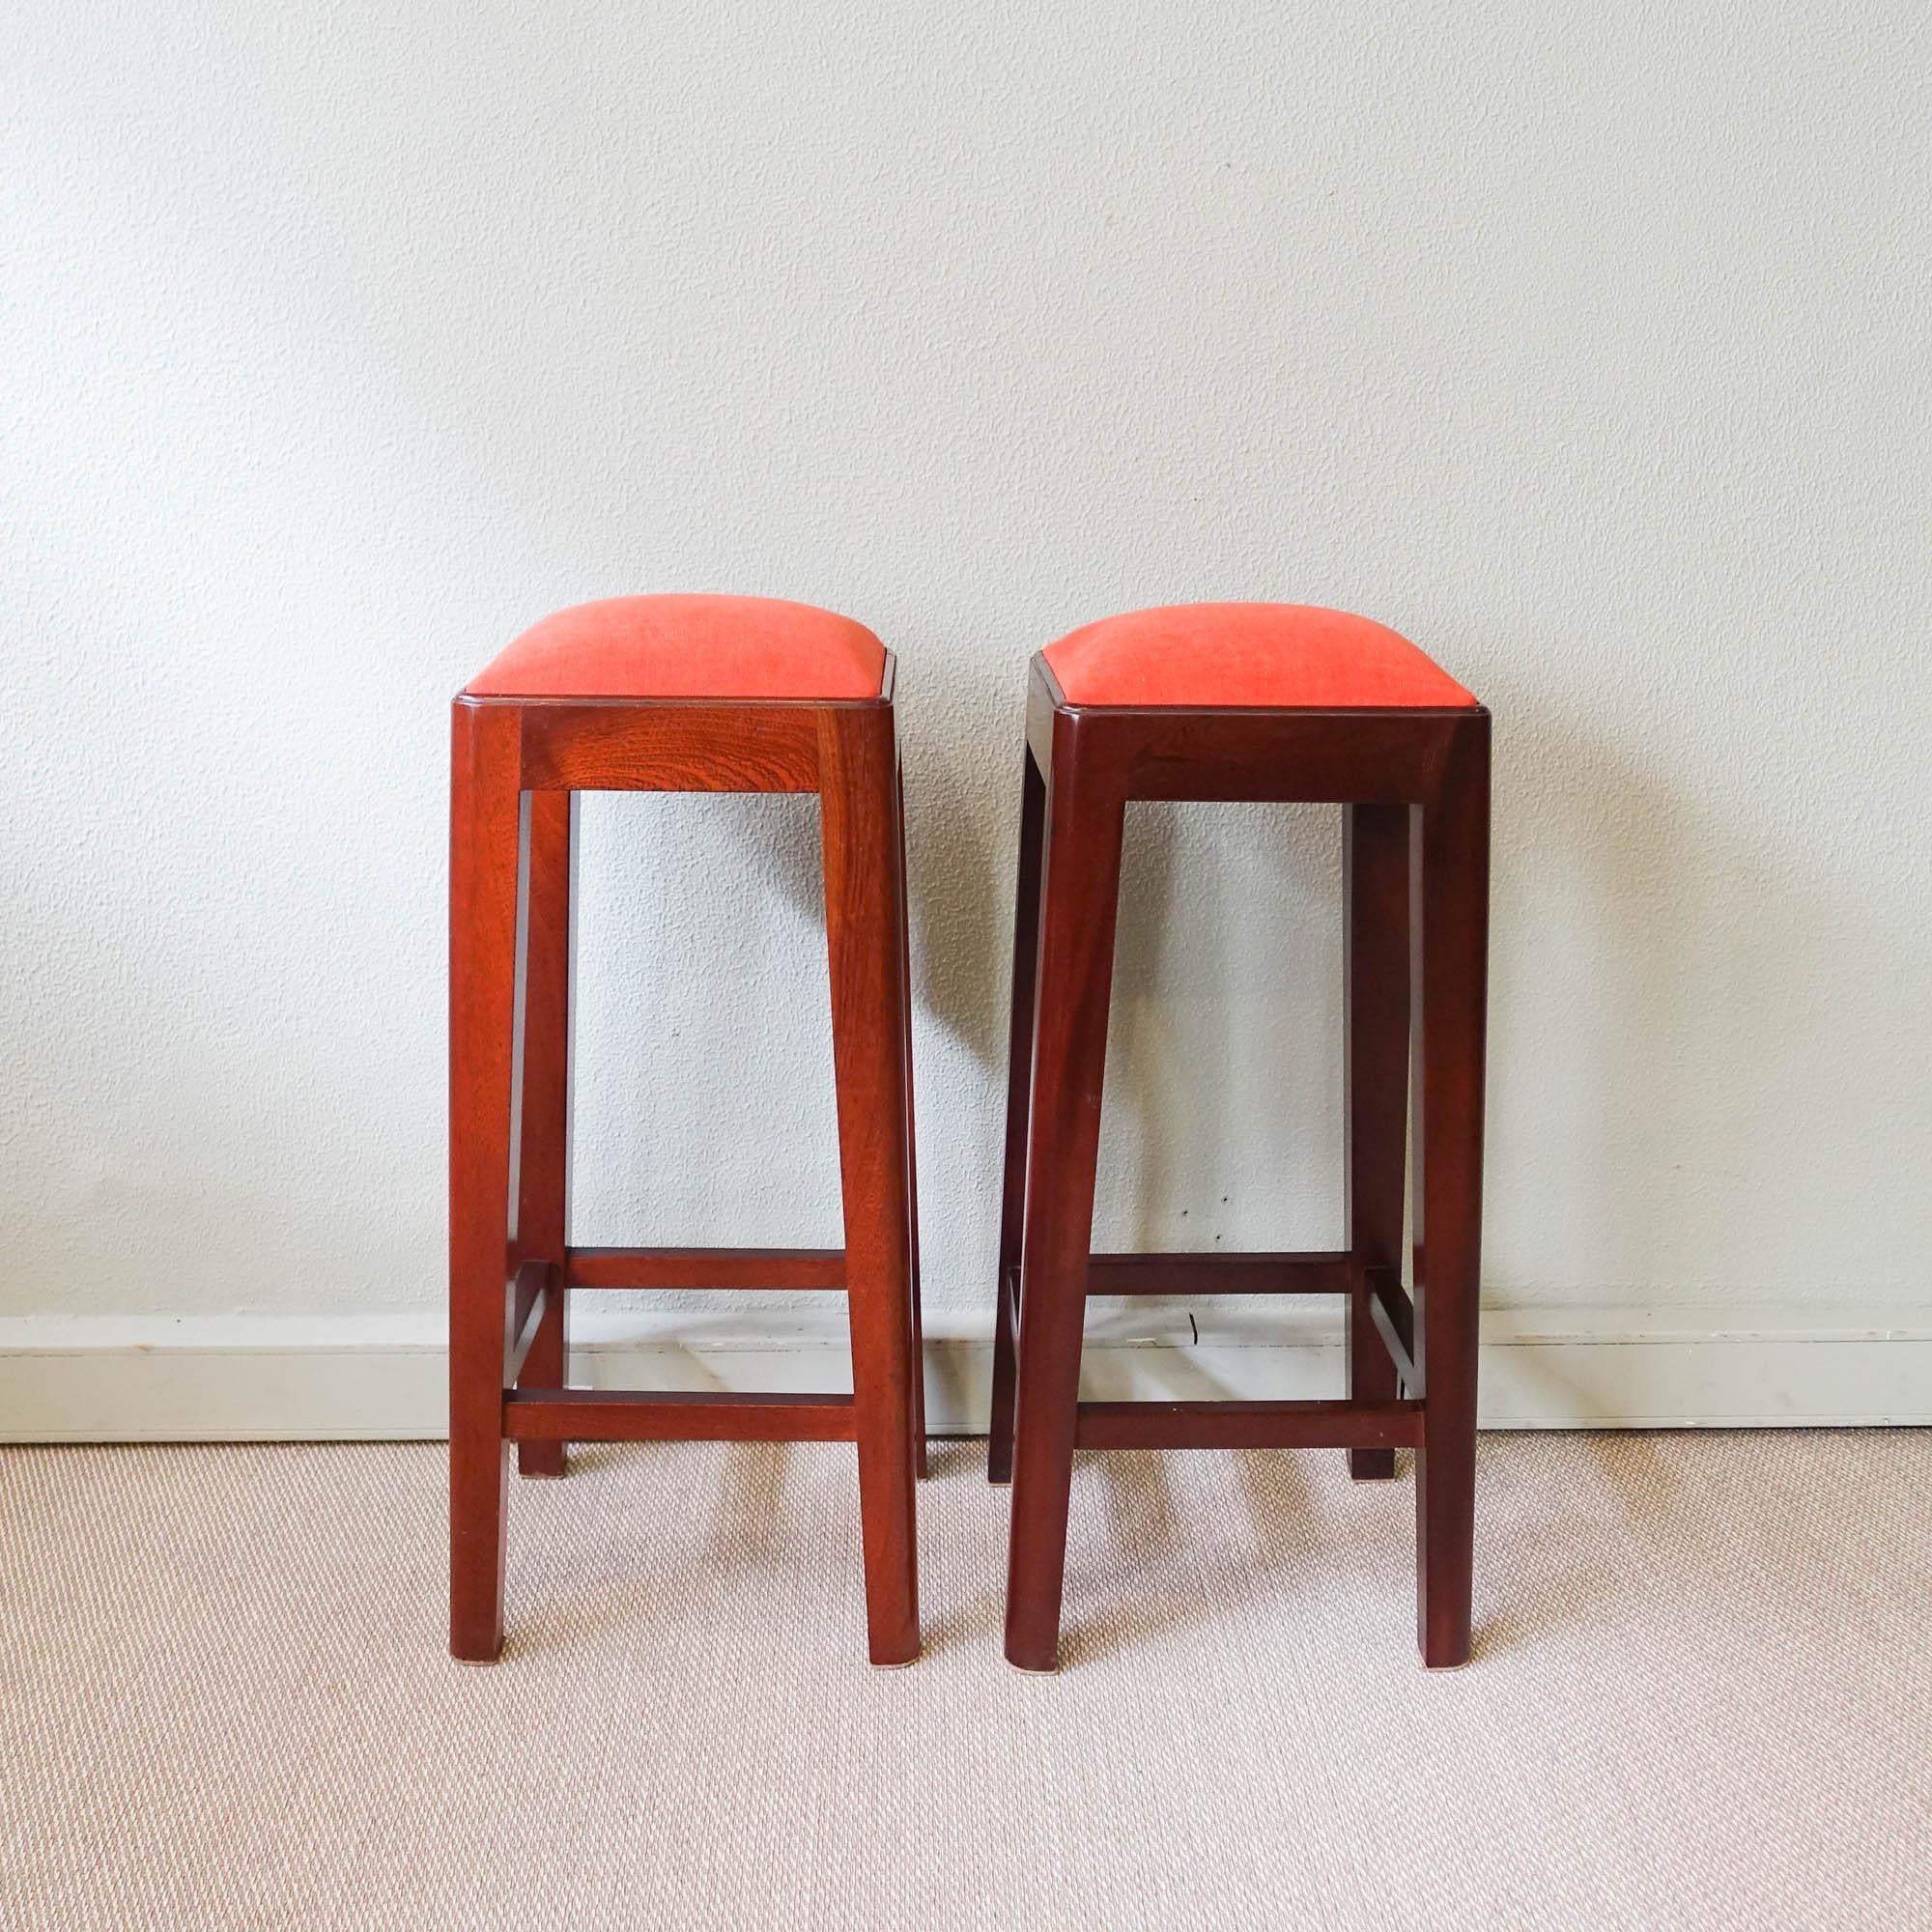 Pair of Vintage Portuguese High Stools, 1960's For Sale 1